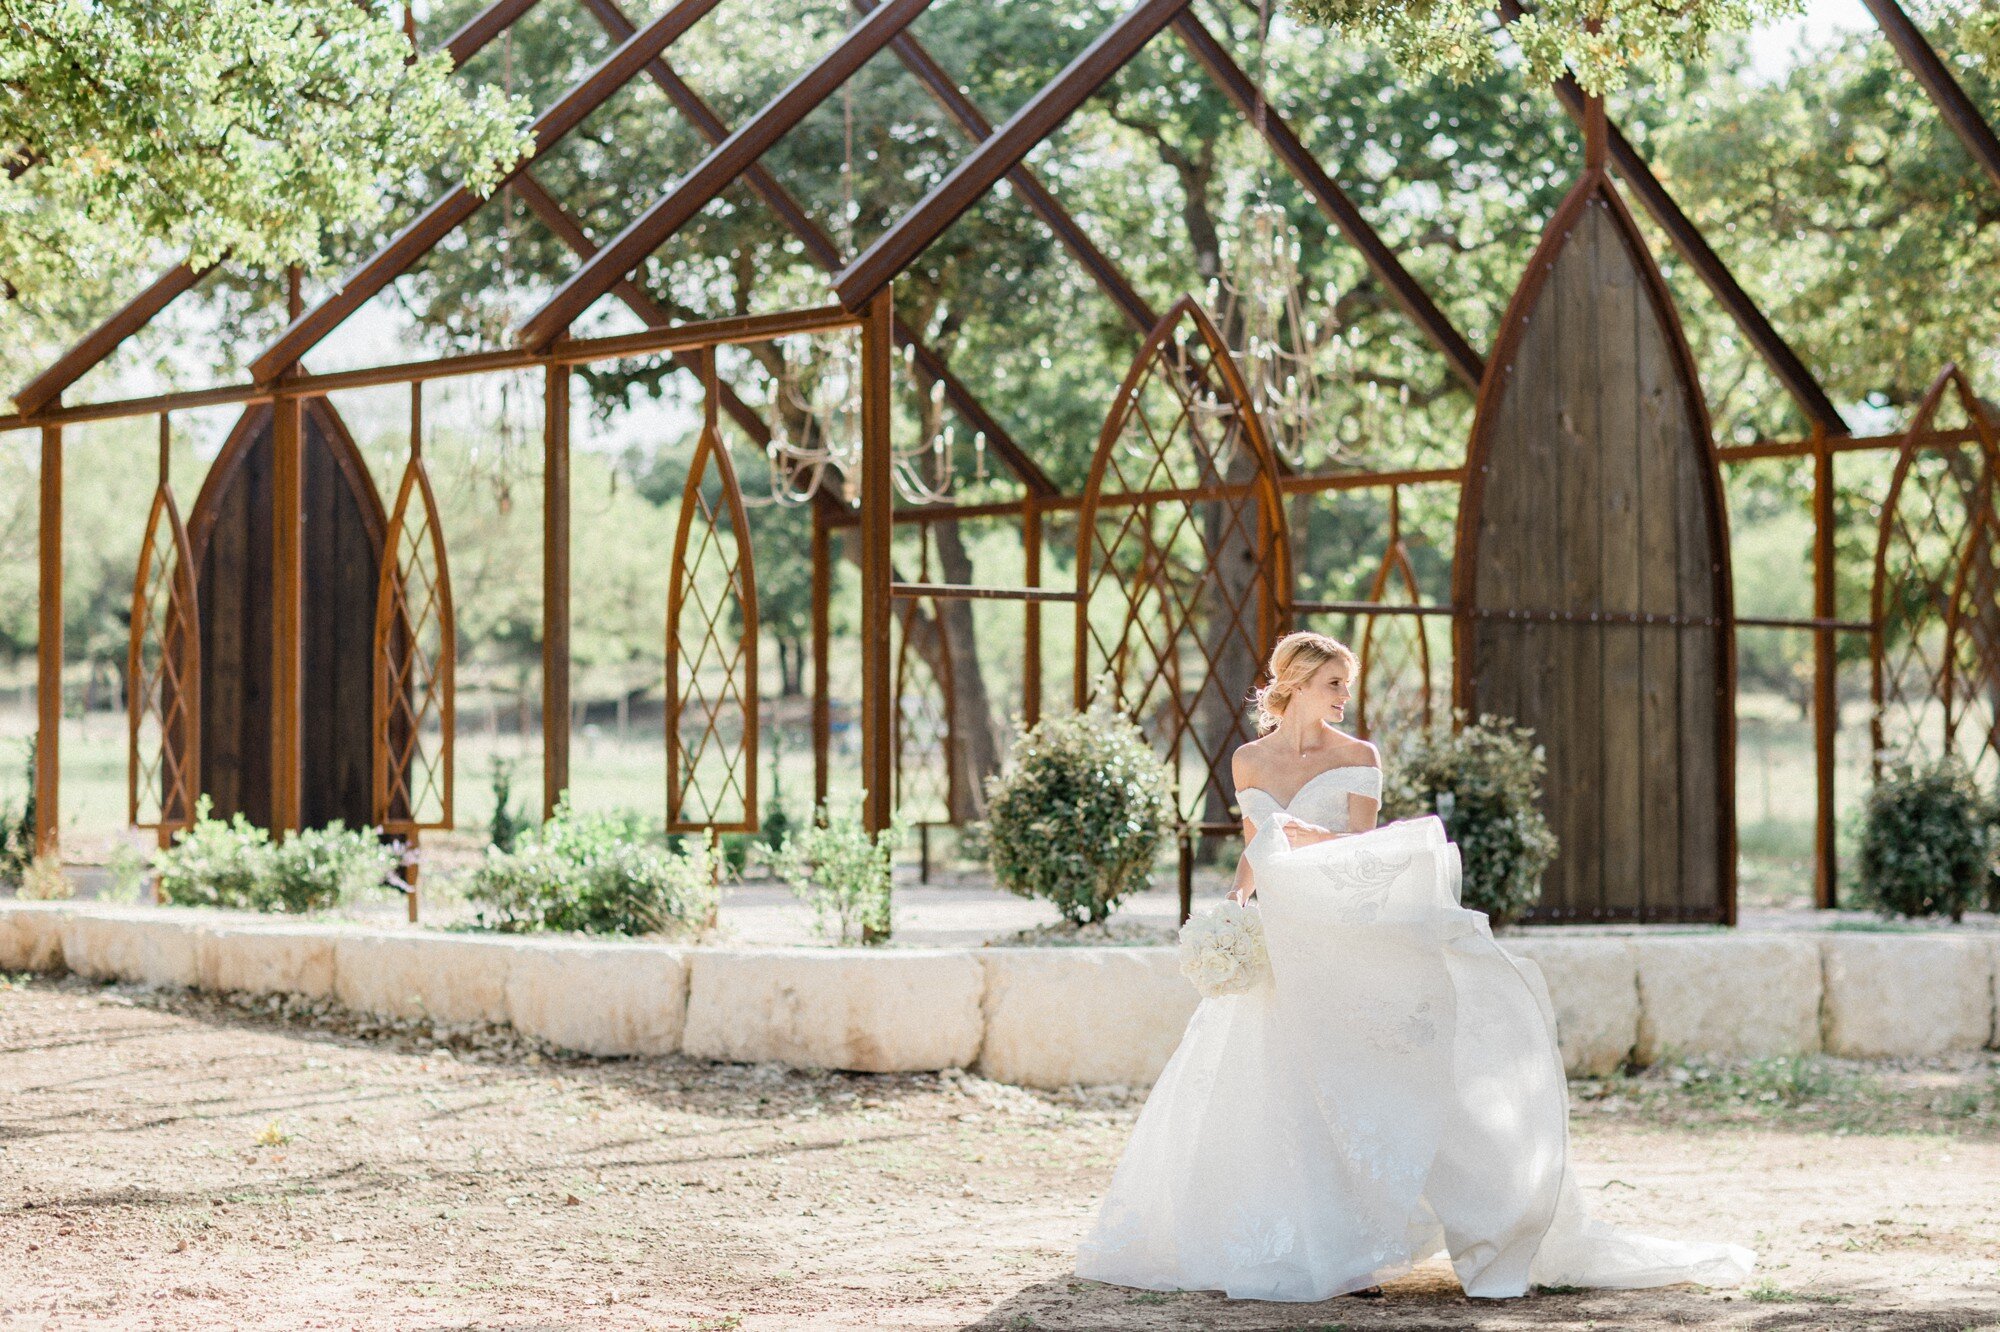  styled wedding photo shoot at Legacy Ranch, Fredericksburg, Texas, luxury light and airy Austin wedding photographer Dreamy Elk Photography and Design, Fiancee Bridal Boutique Boerne, Sunny Hair and Makeup, Form to Feeling, open air steel framework 